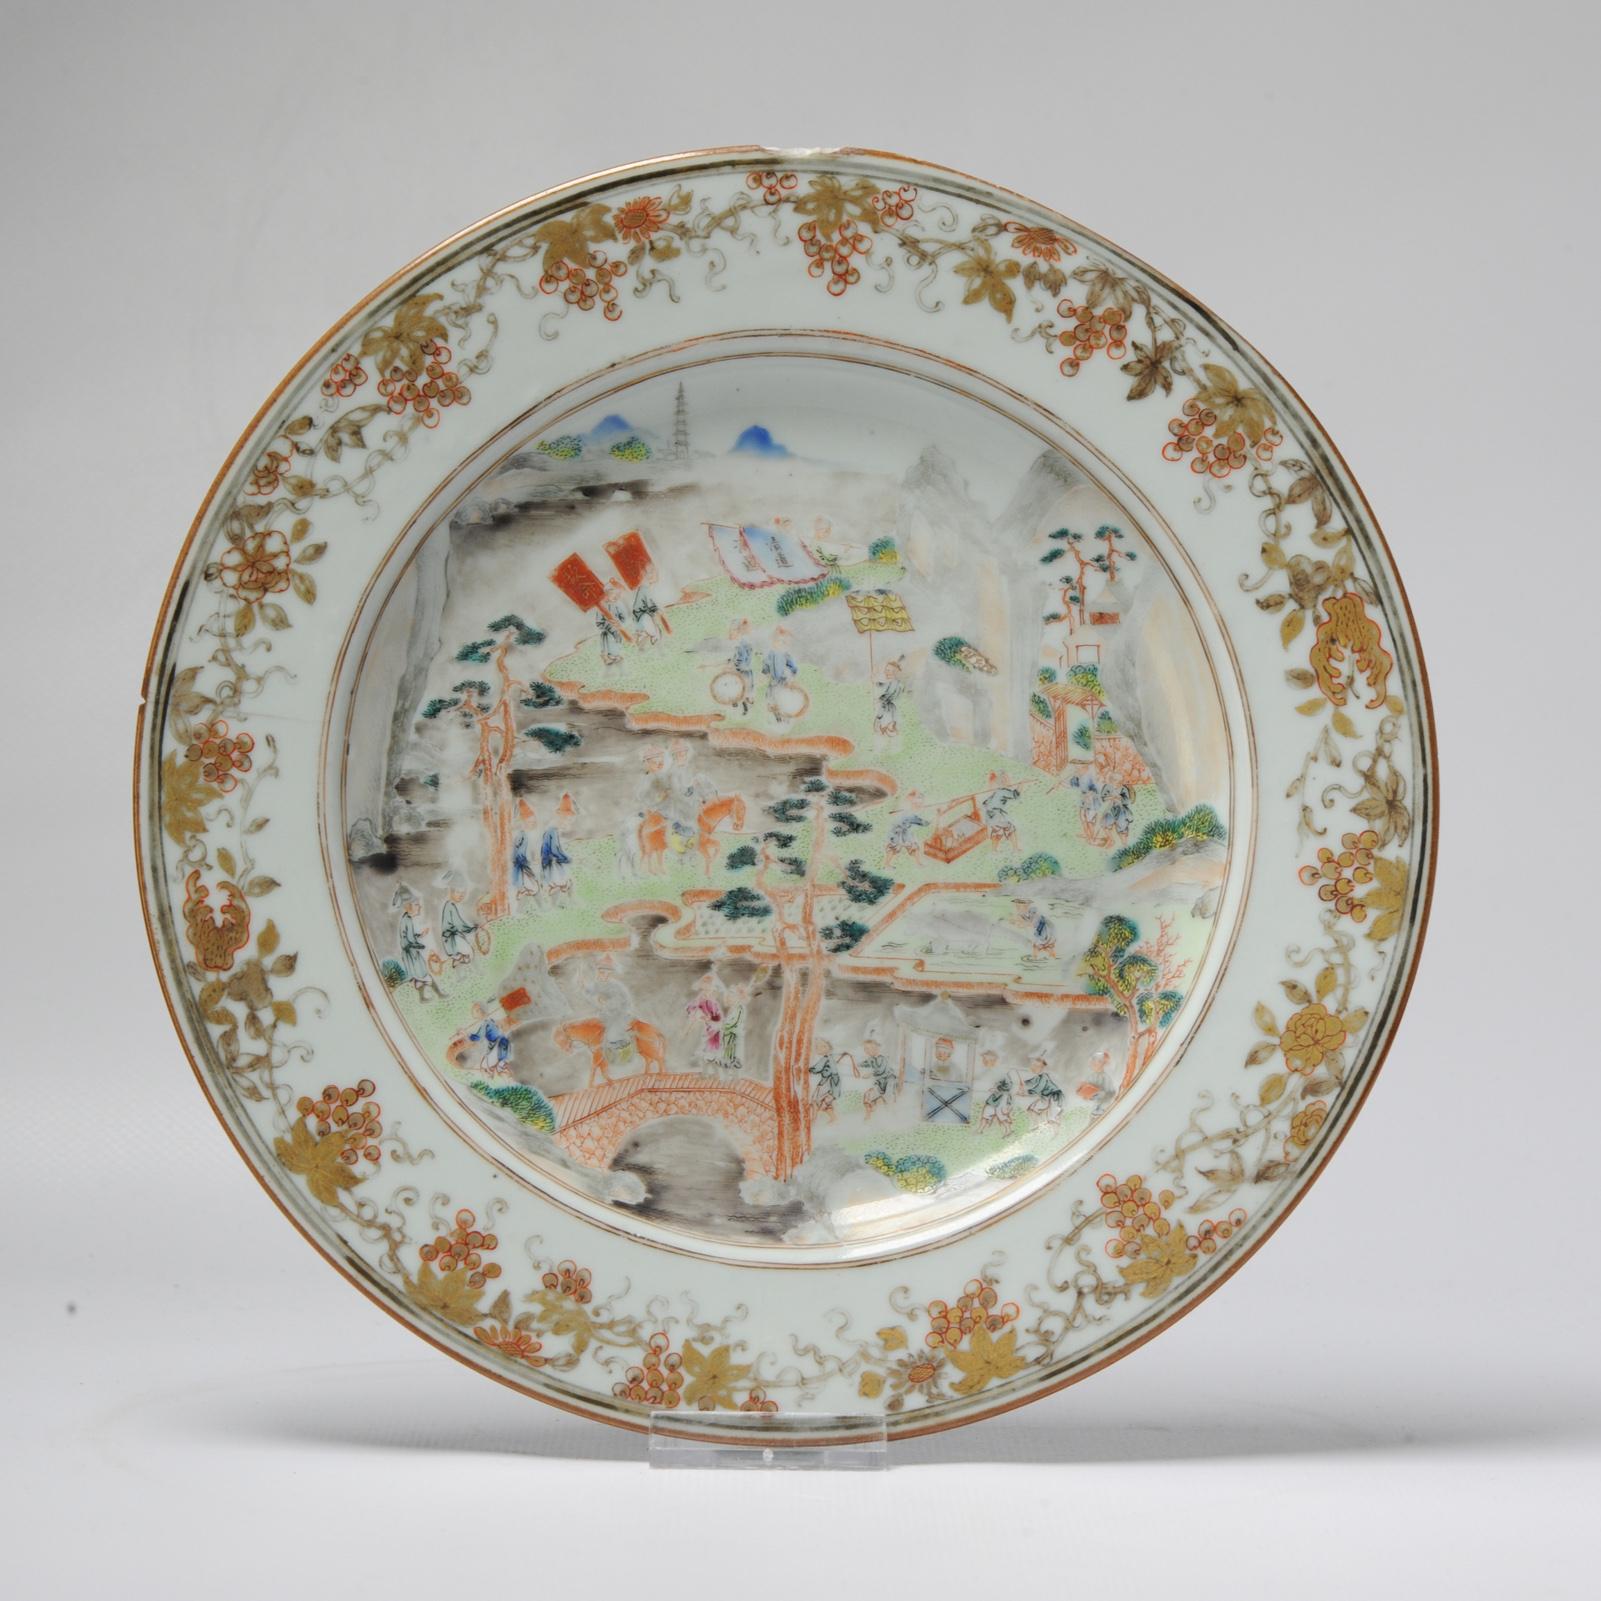 Description
A very nice example of famille rose with a Chinese scene of a procession. A very rare piece

Condition
2 frits, 2 lines, 2 chips (1 larger, more like frit area) size 228x26mm
Period
18th century Qing (1661 - 1912)

Period
18th